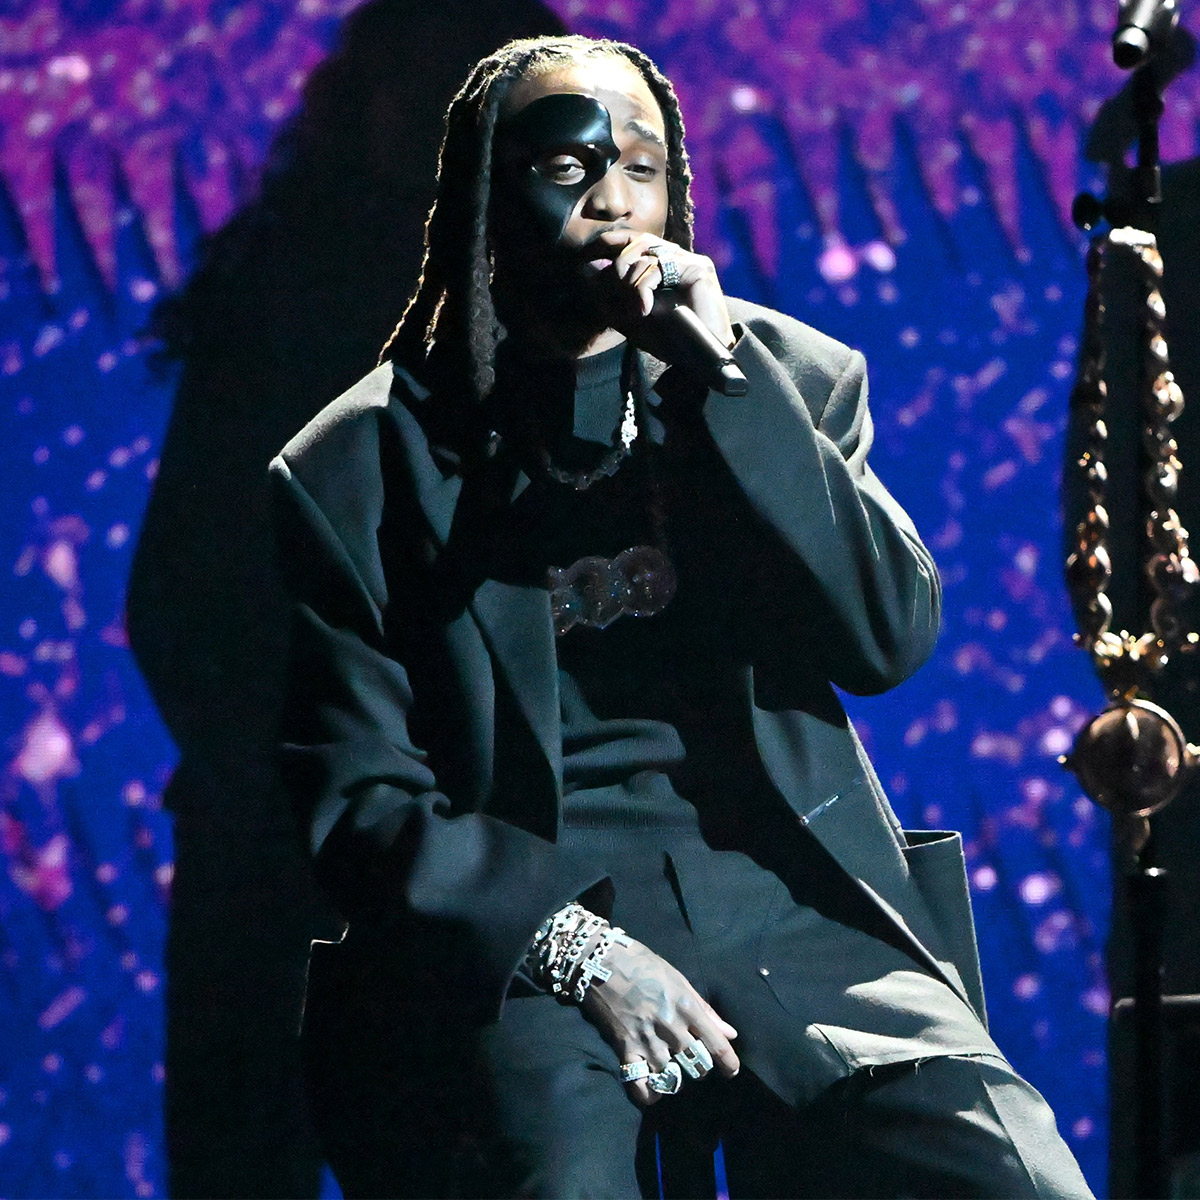 Quavo pays tribute to Takeoff at 2023 Grammys